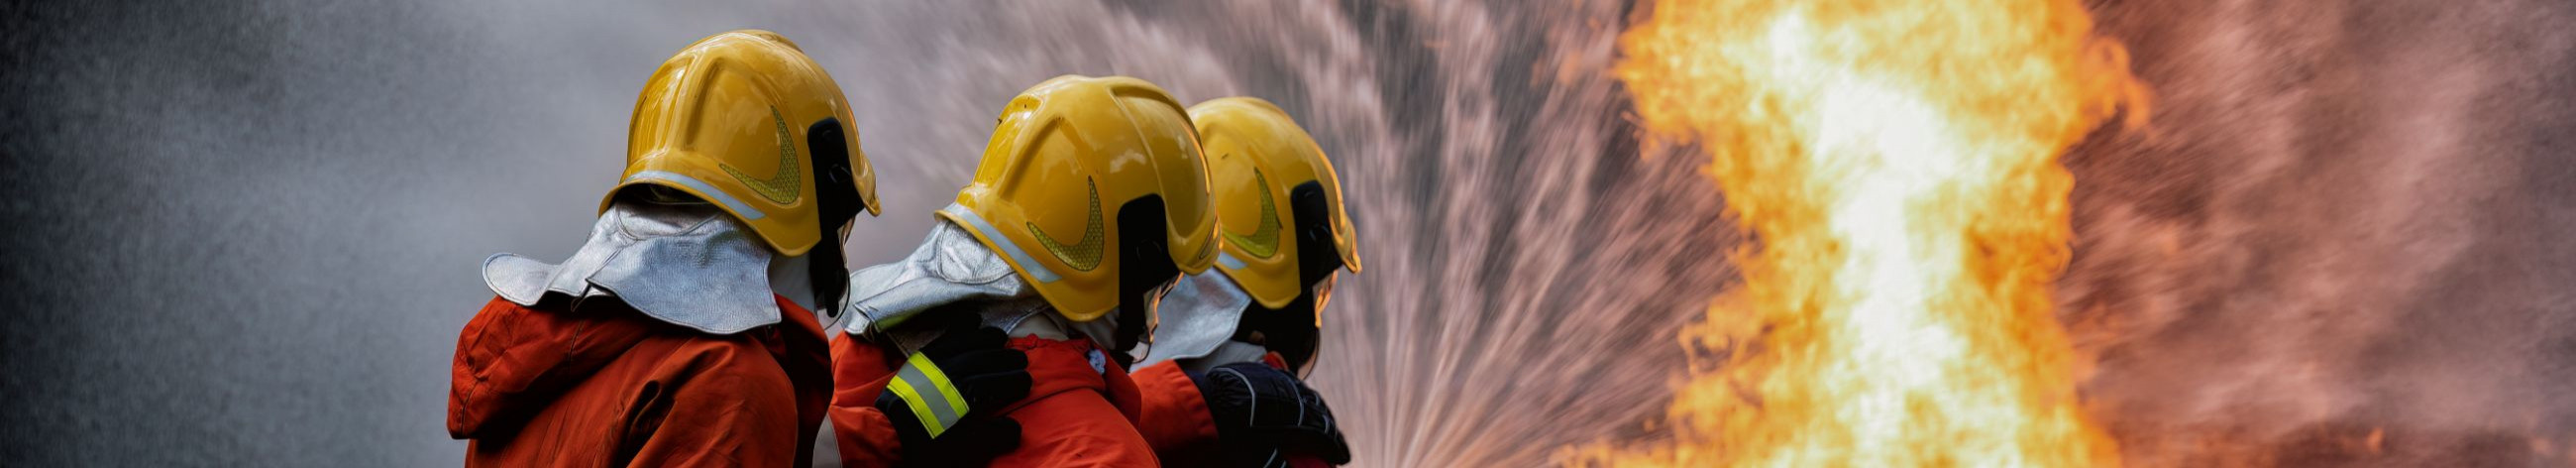 Fire safety equipment, Rescue equipment, security and surveillance services, fire safety, Construction of gas installation, Gas works, Inspection and maintenance, Design, construction and maintenance of fire safety, fire safety service, technical advice